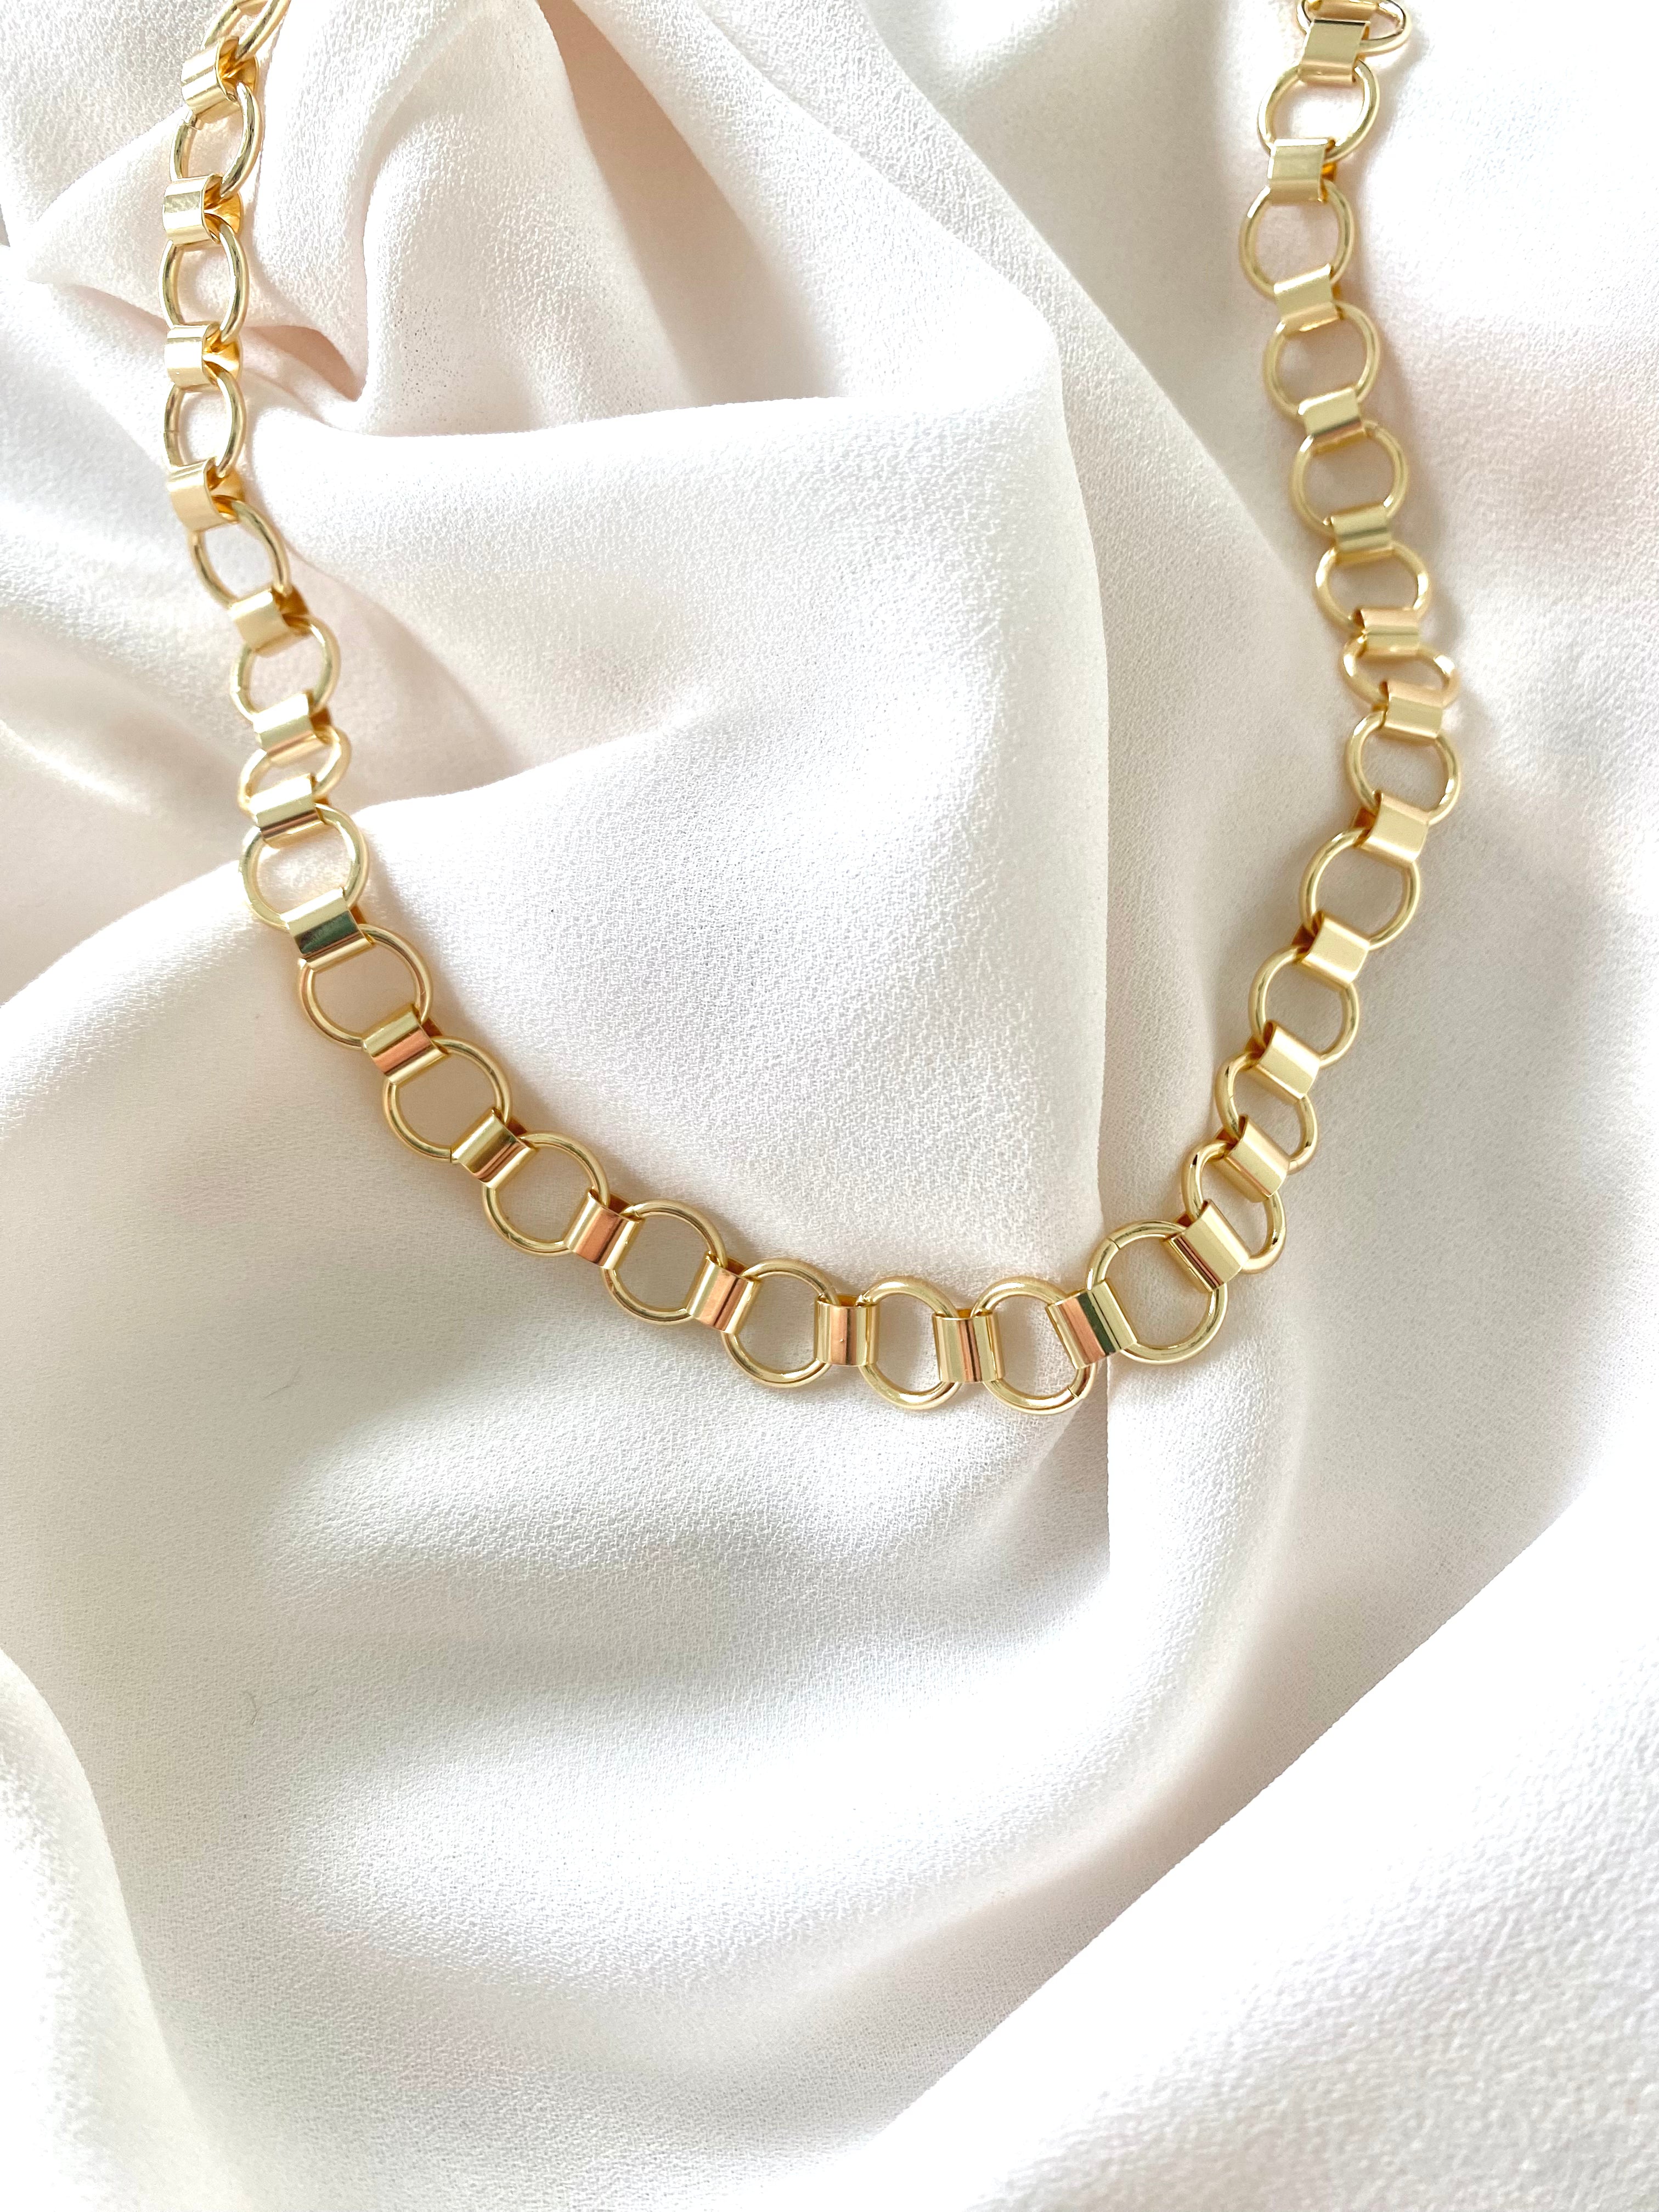 14K Gold Filled Chain 